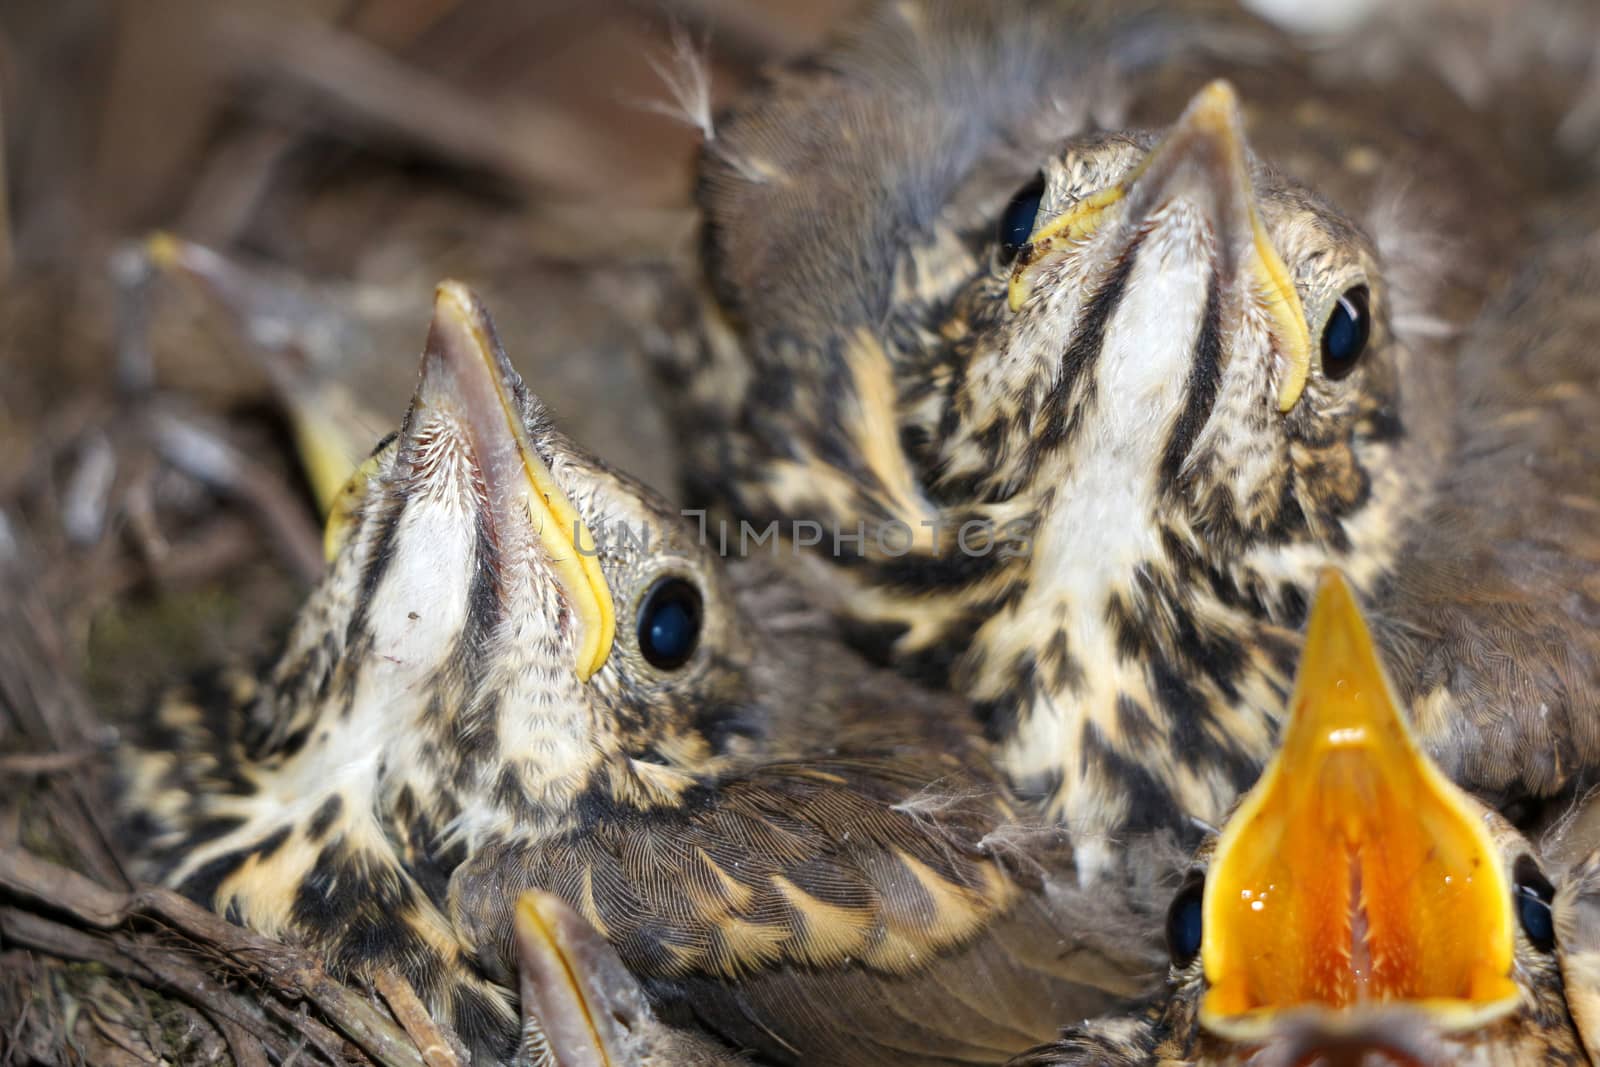 Little baby birds sitting in the nest, close-up photography of nestlings, cute squeakers.